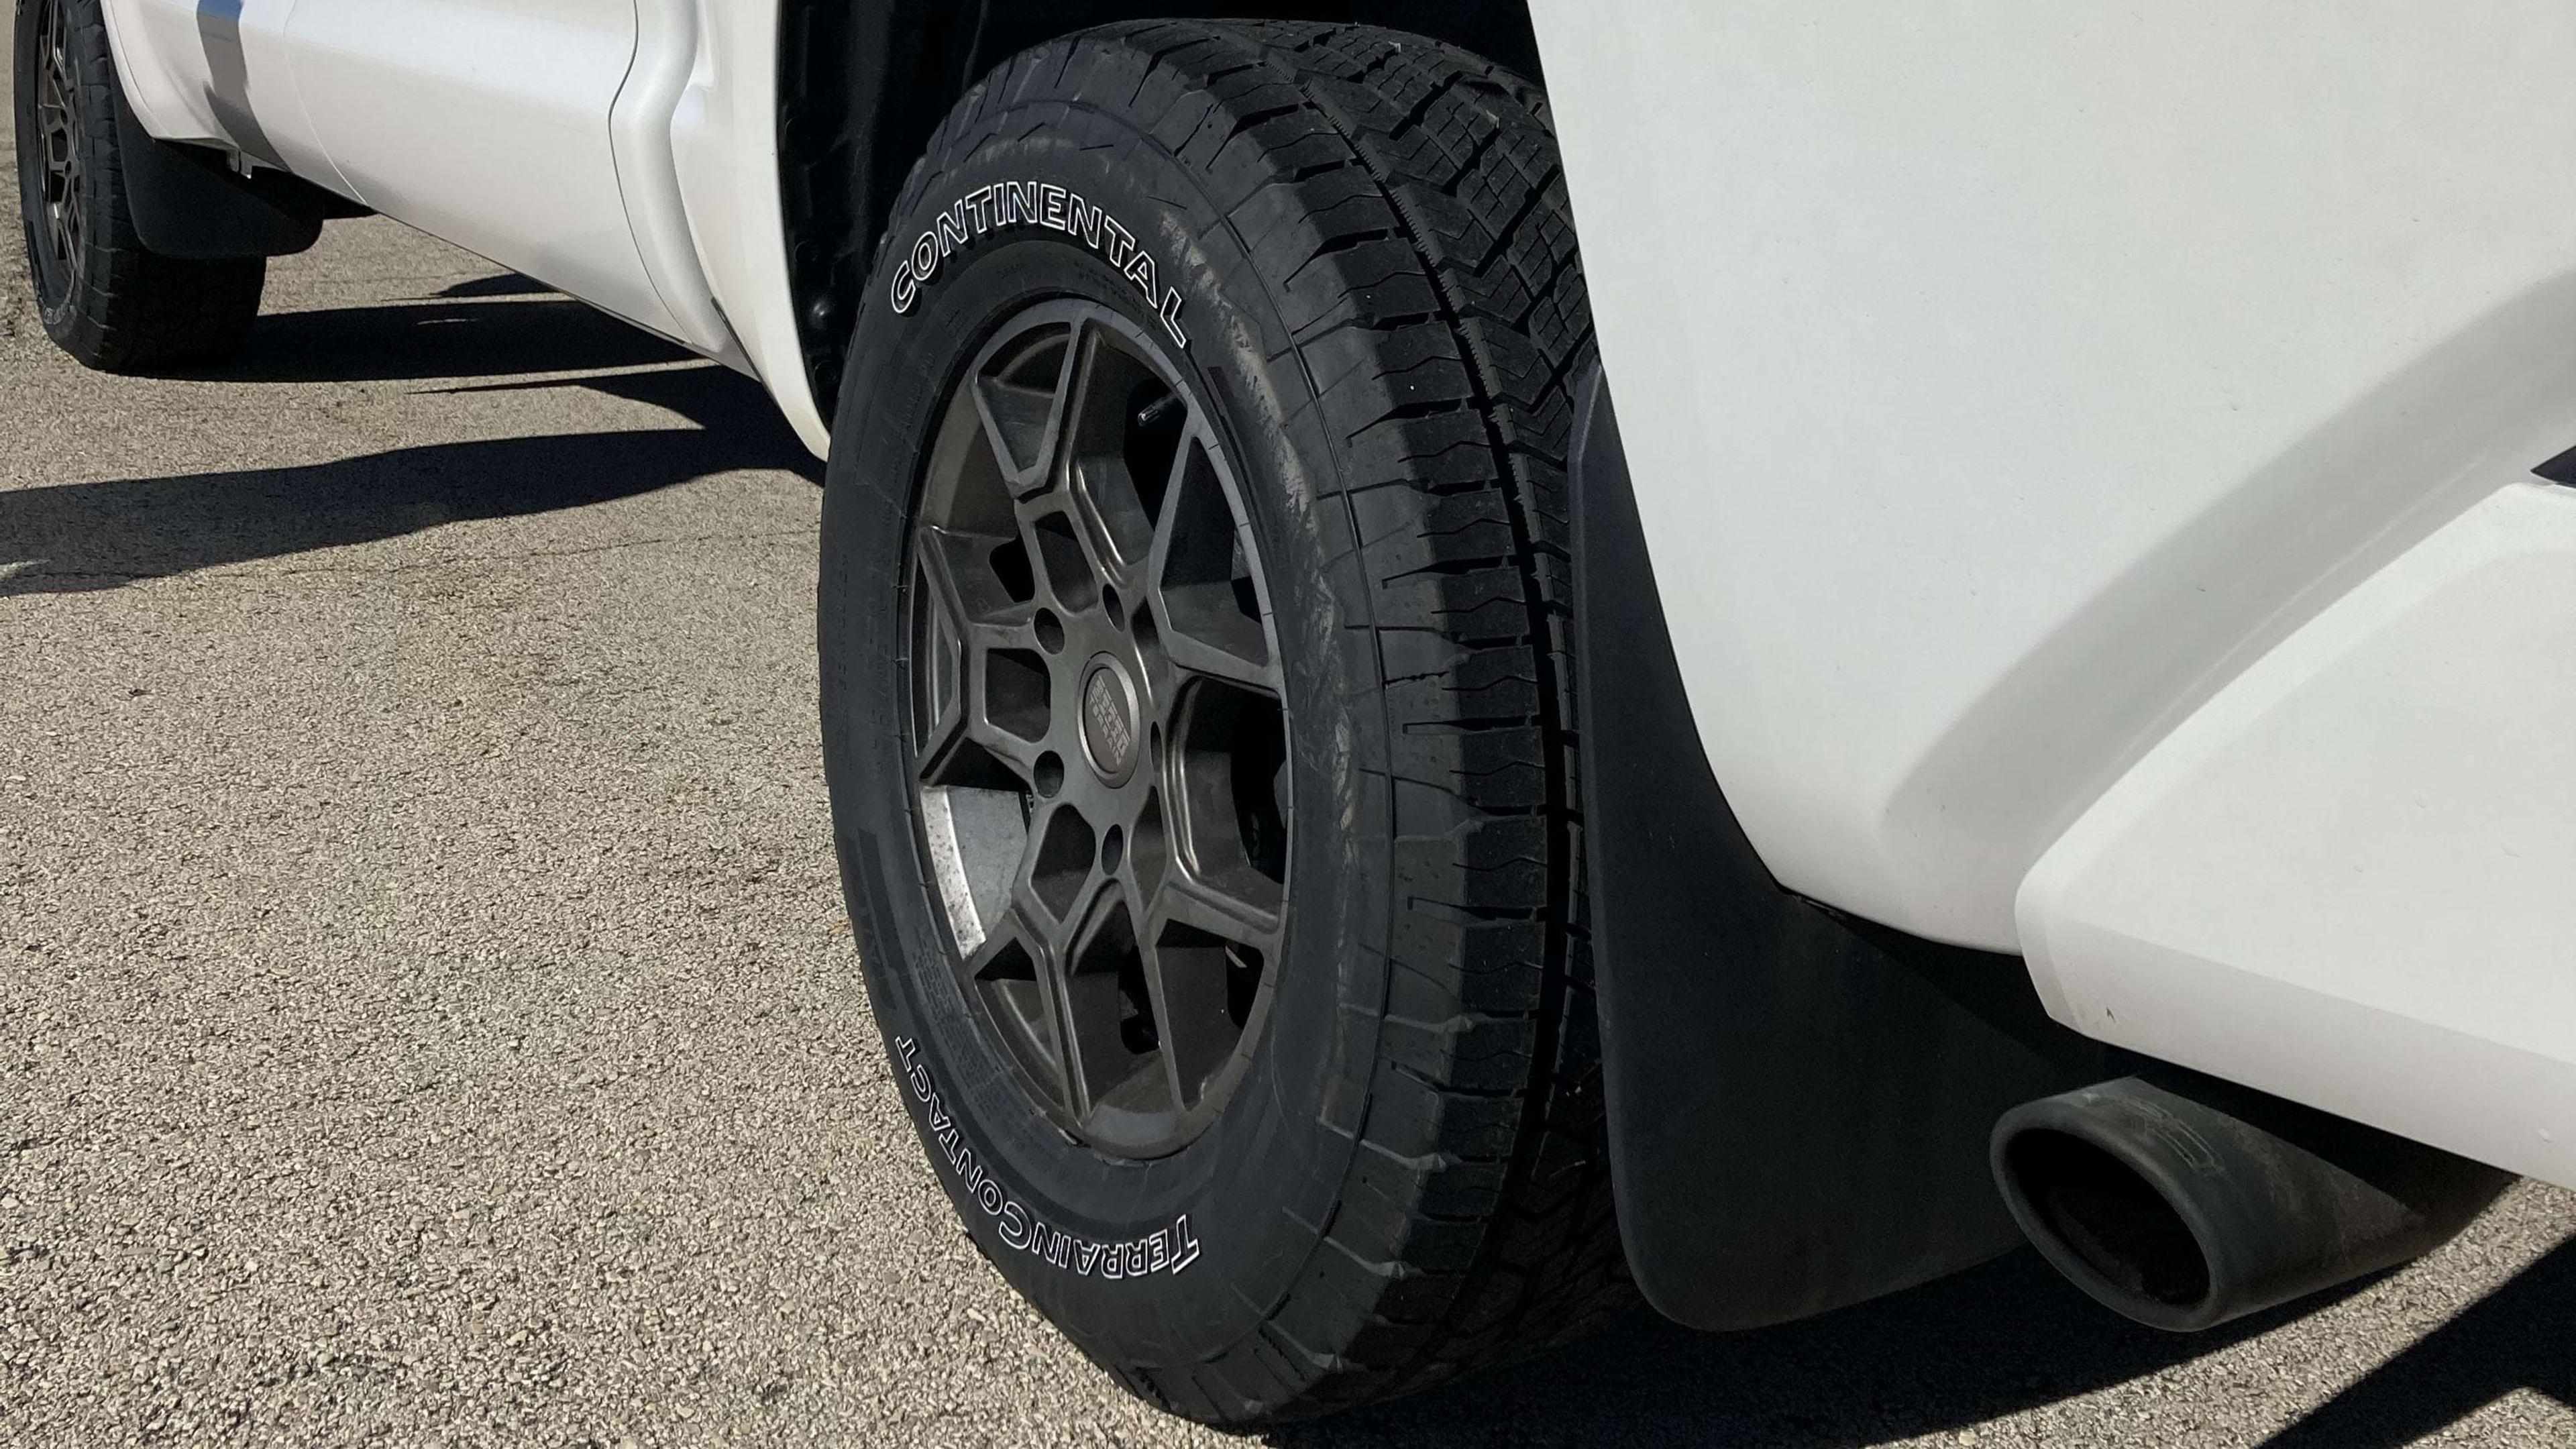 Continental TerrainContact A/T tires on a Toyota Tundra